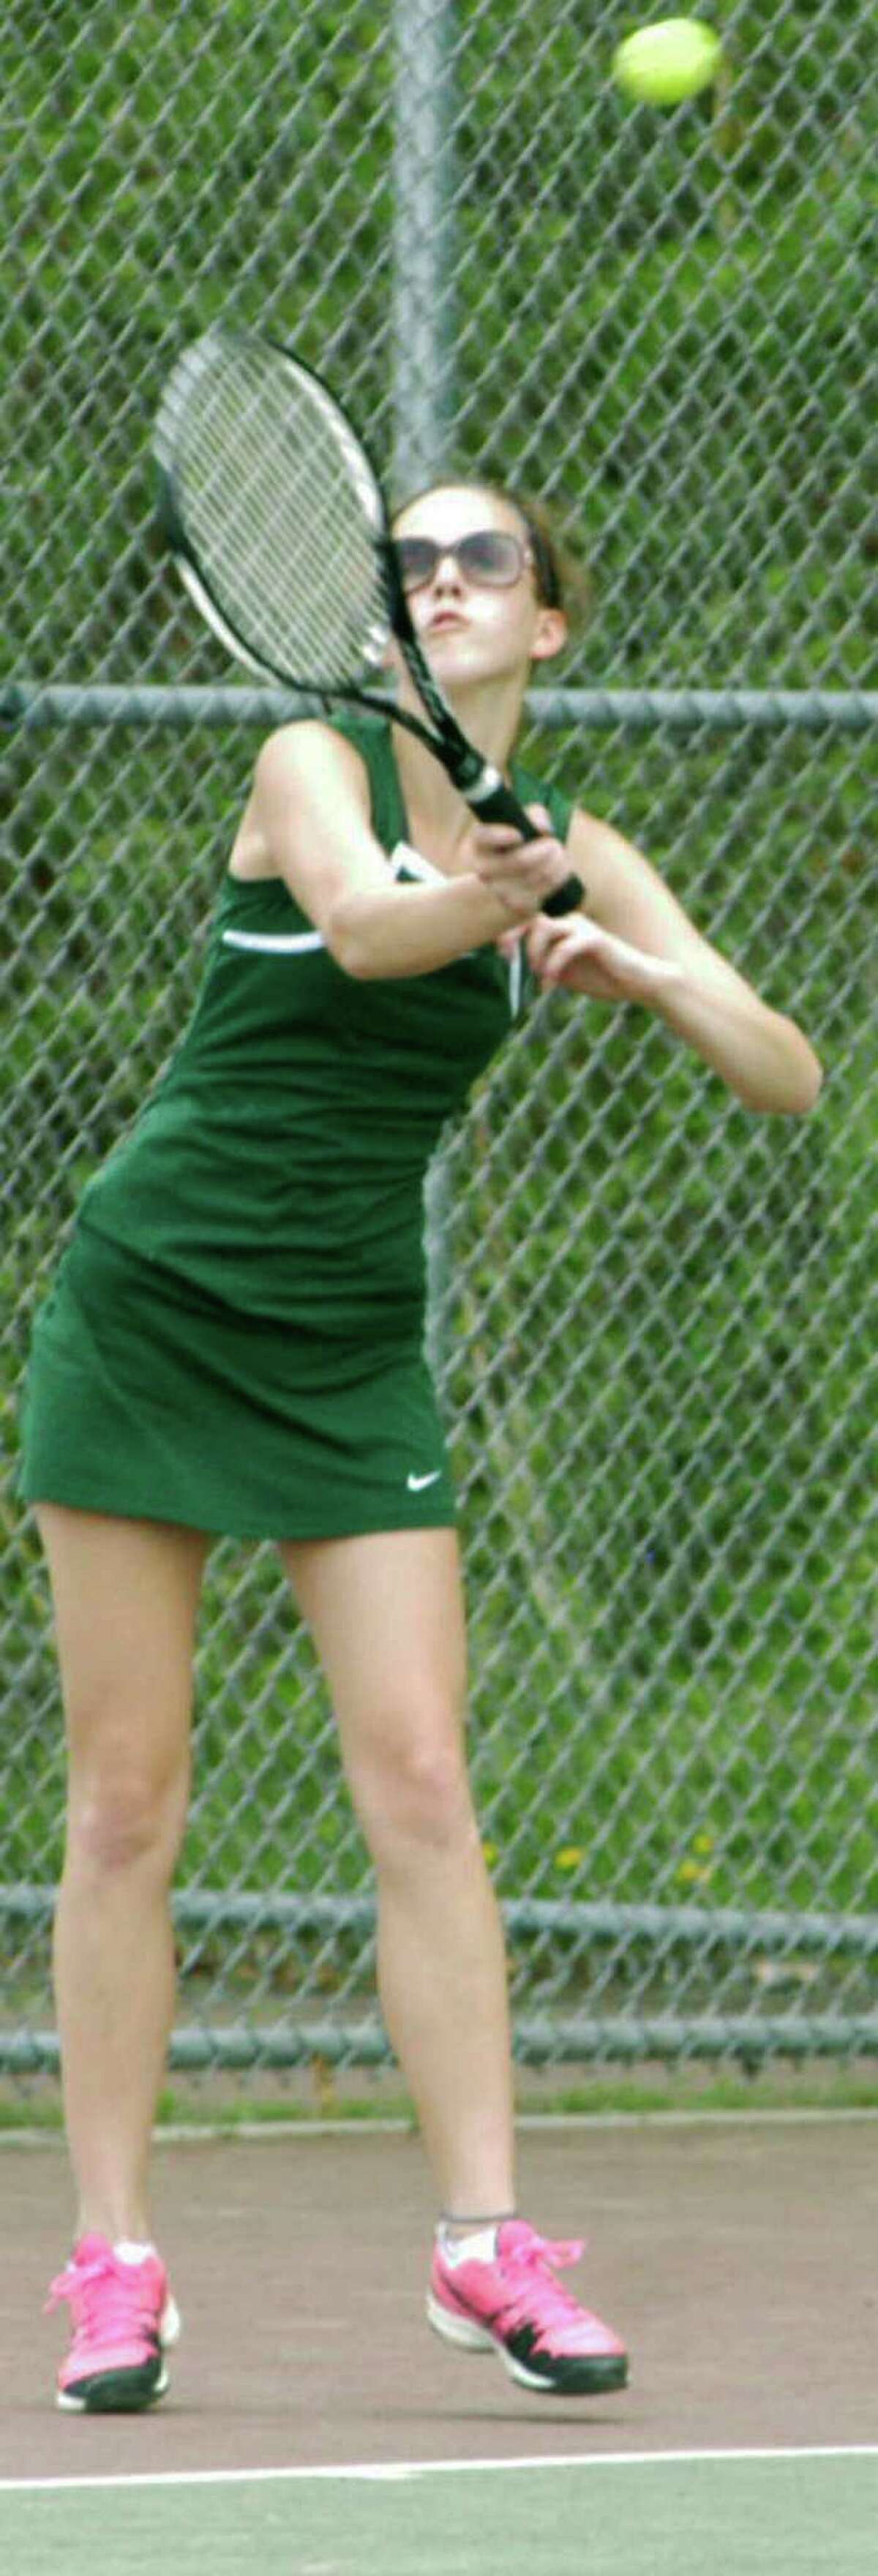 The Green Wave's Sarah Dengler leans into a serve during New Milford High School girls' tennis' 4-3 victory over Immaculate, May 14, 2014 at NMHS.